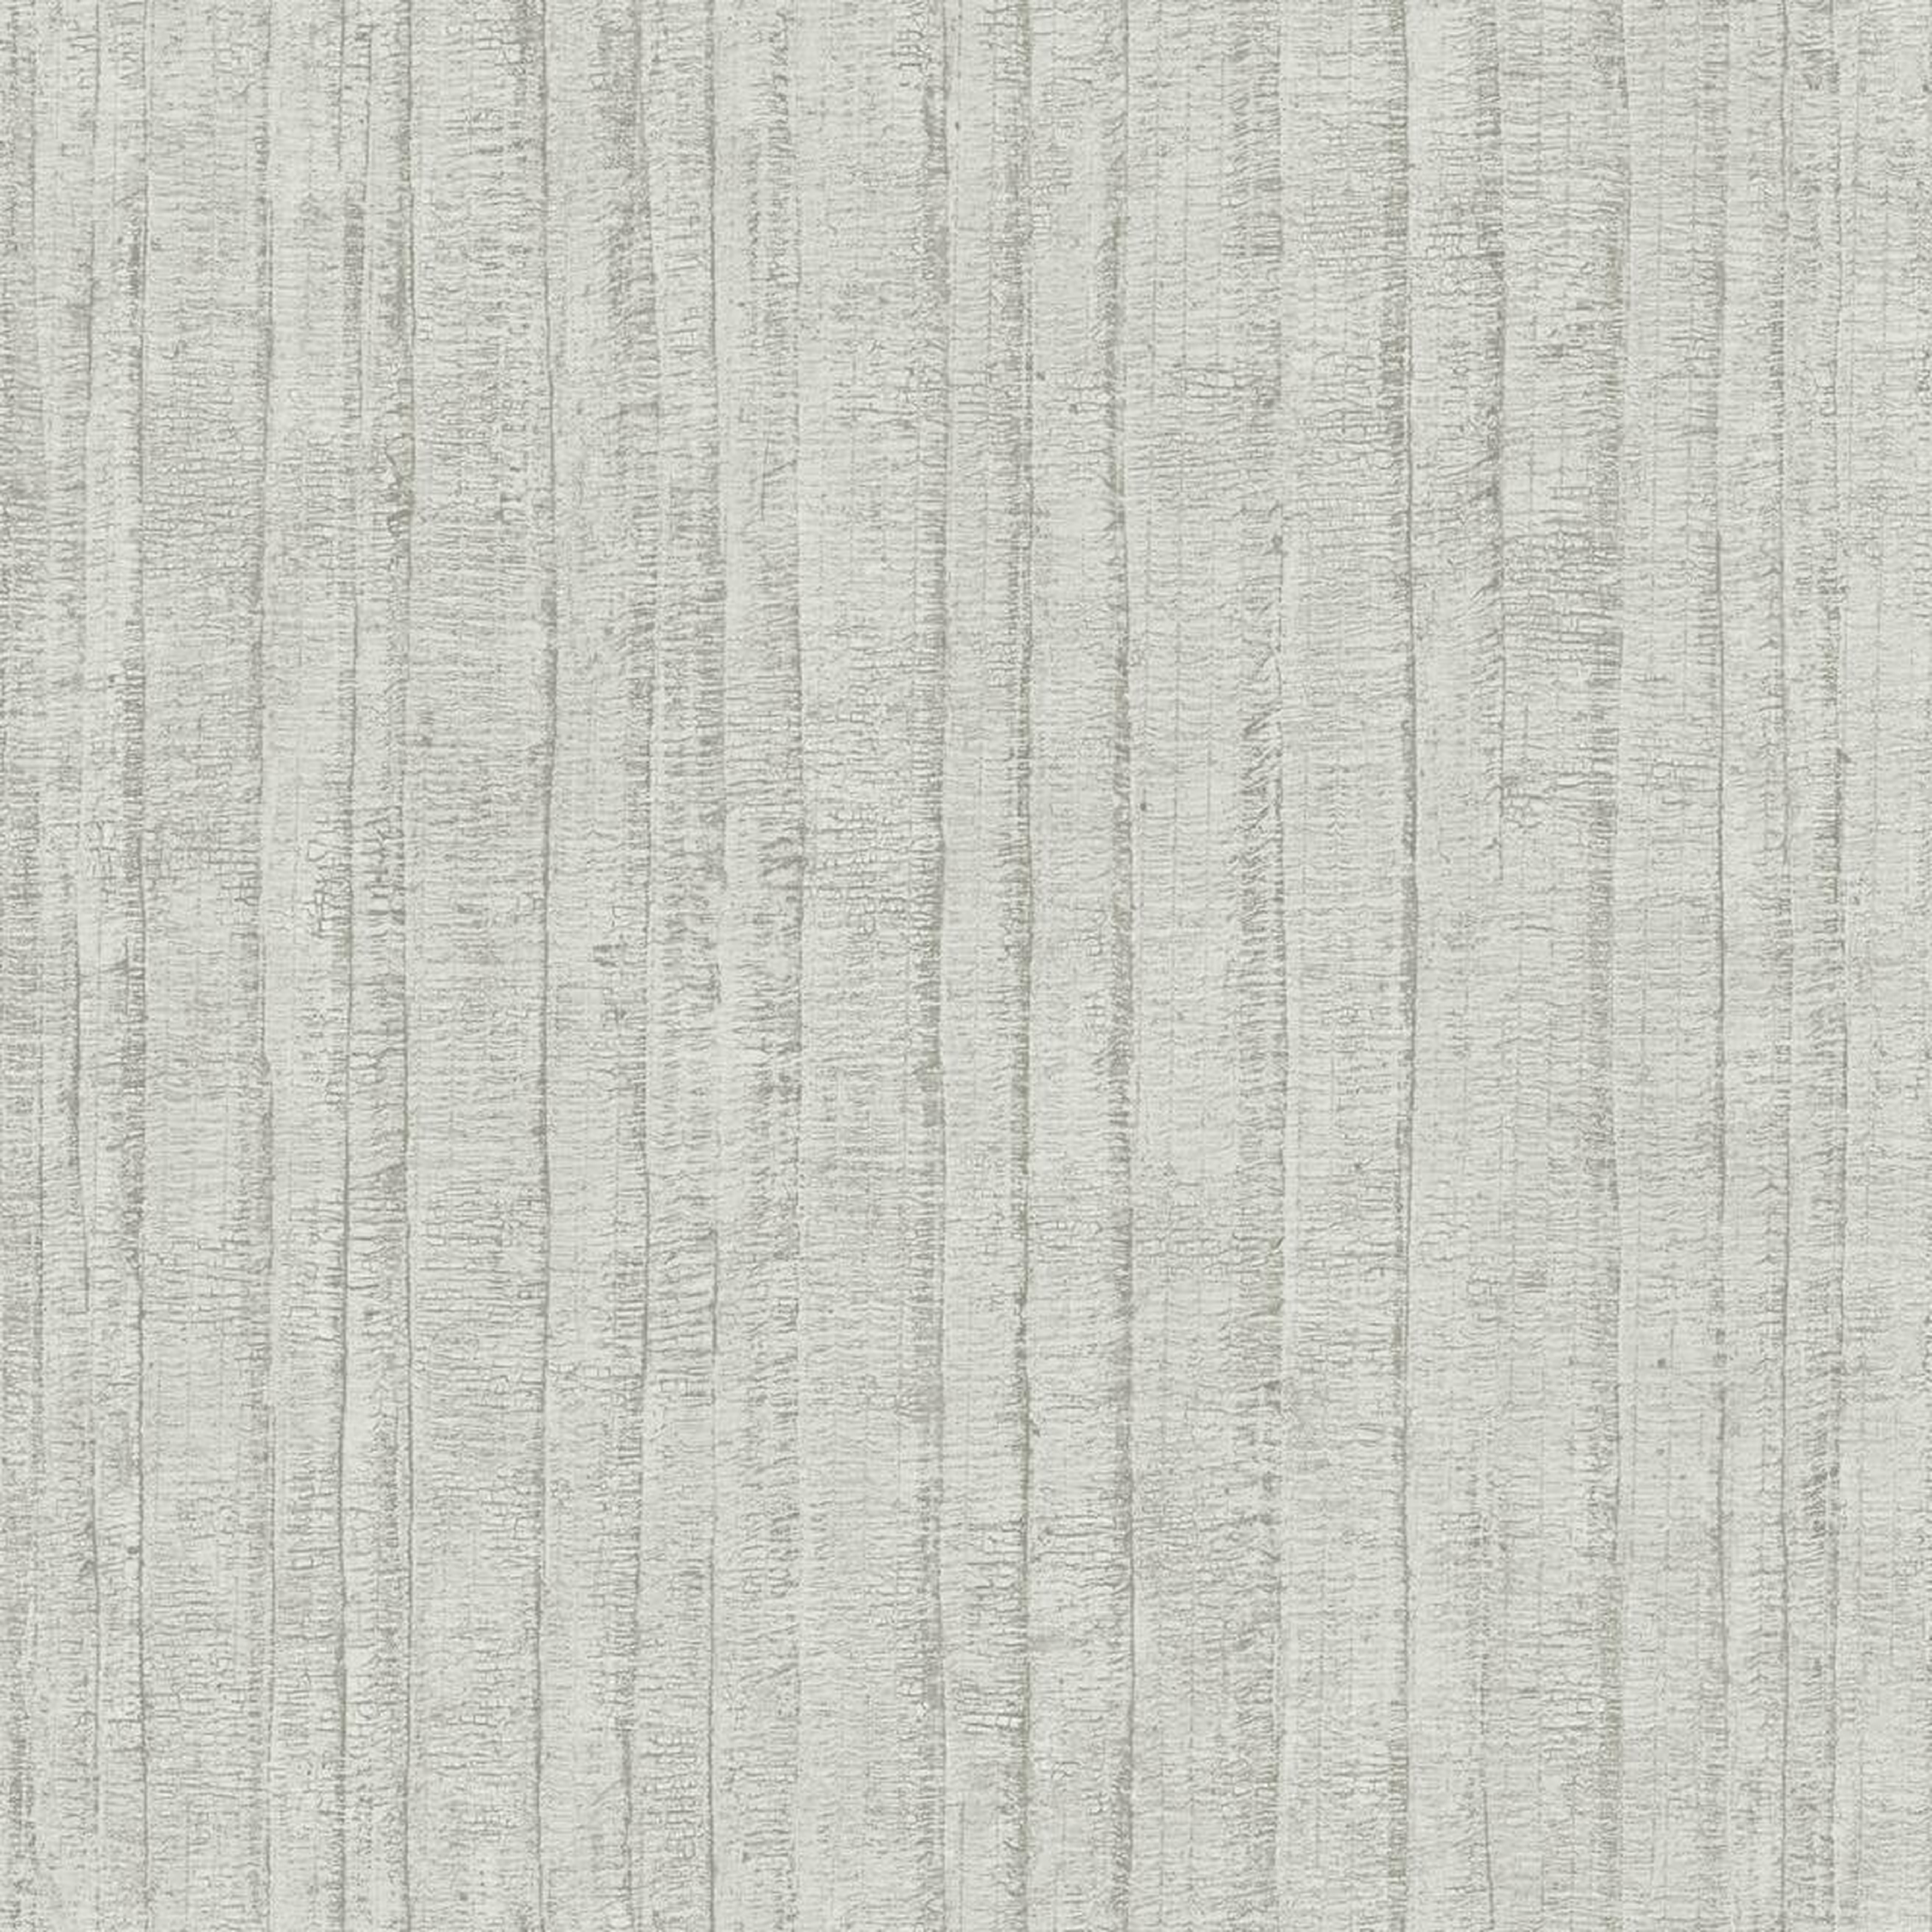 Crackled Stria Texture Peel and Stick Wallpaper - York Wallcoverings